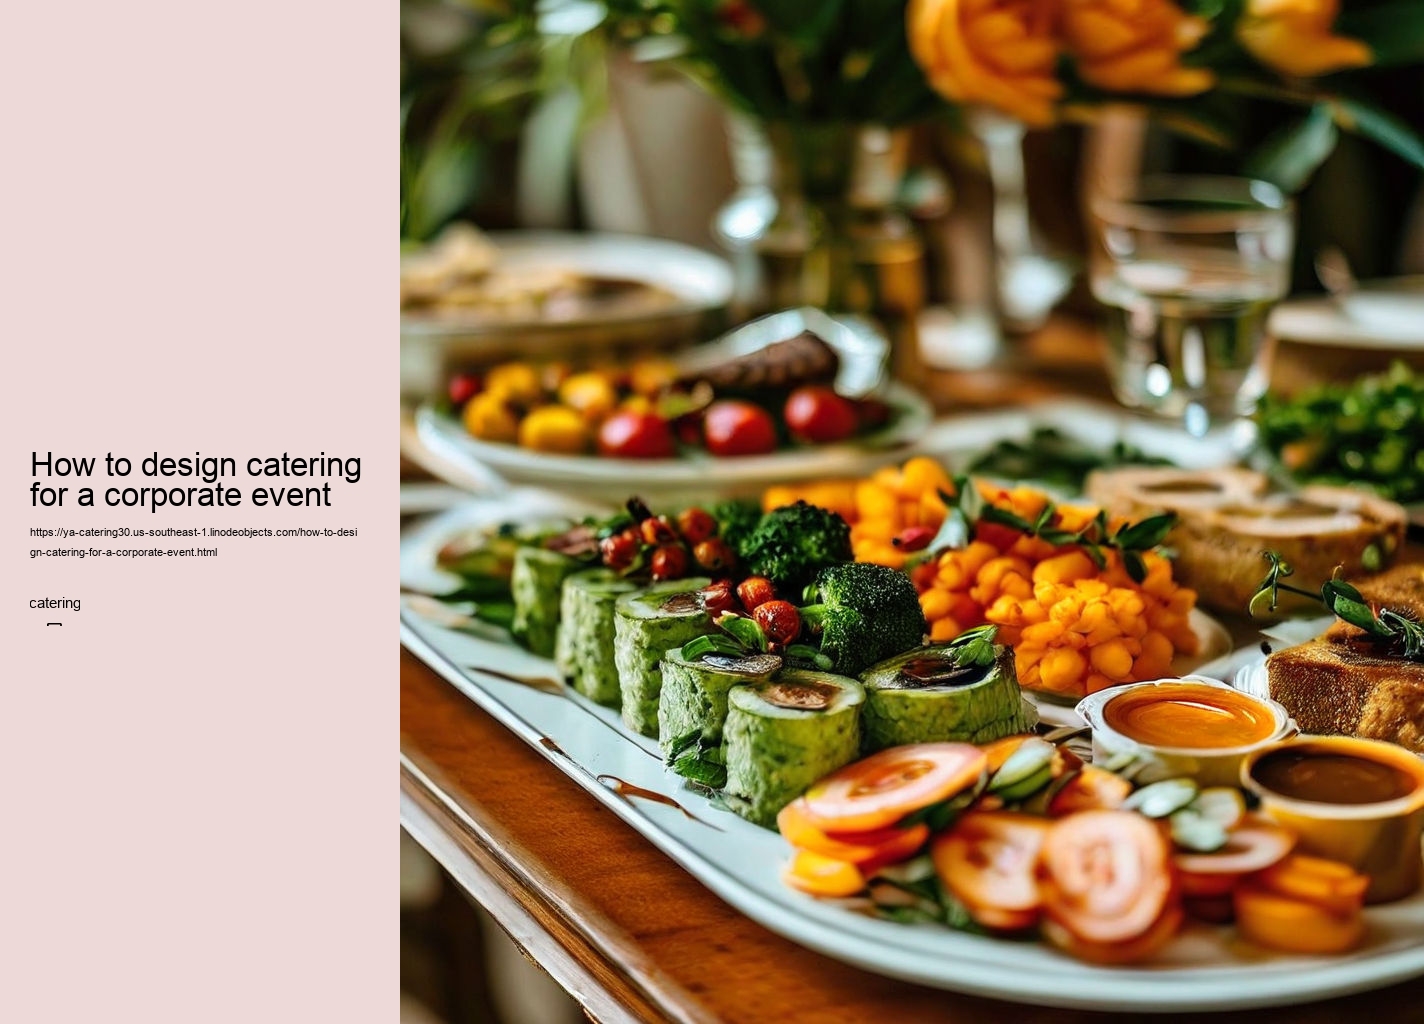 How to design catering for a corporate event